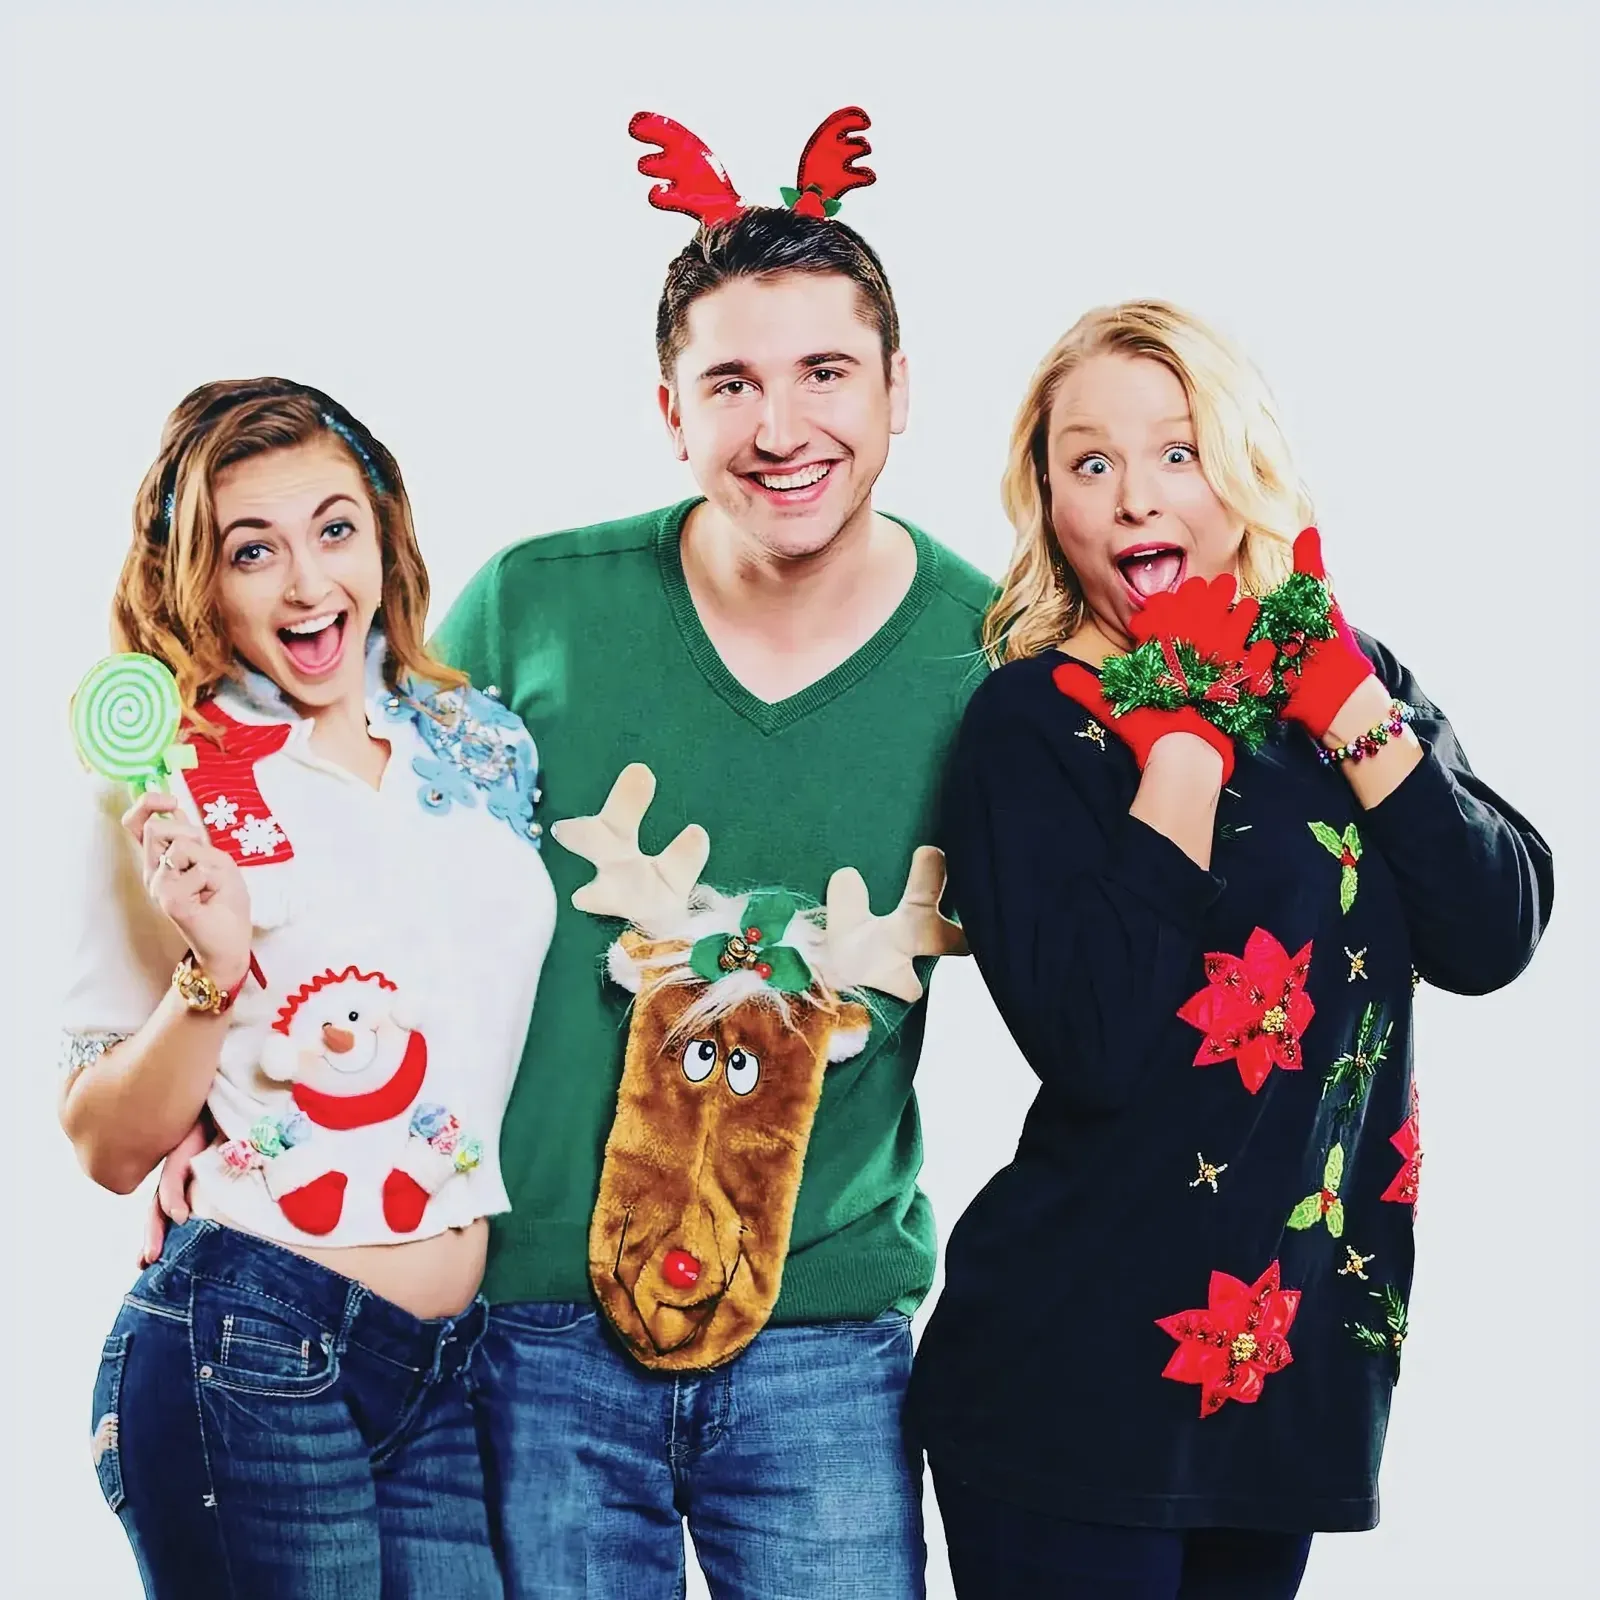 Group of three individuals in festive sweaters and accessories, posing for a picture